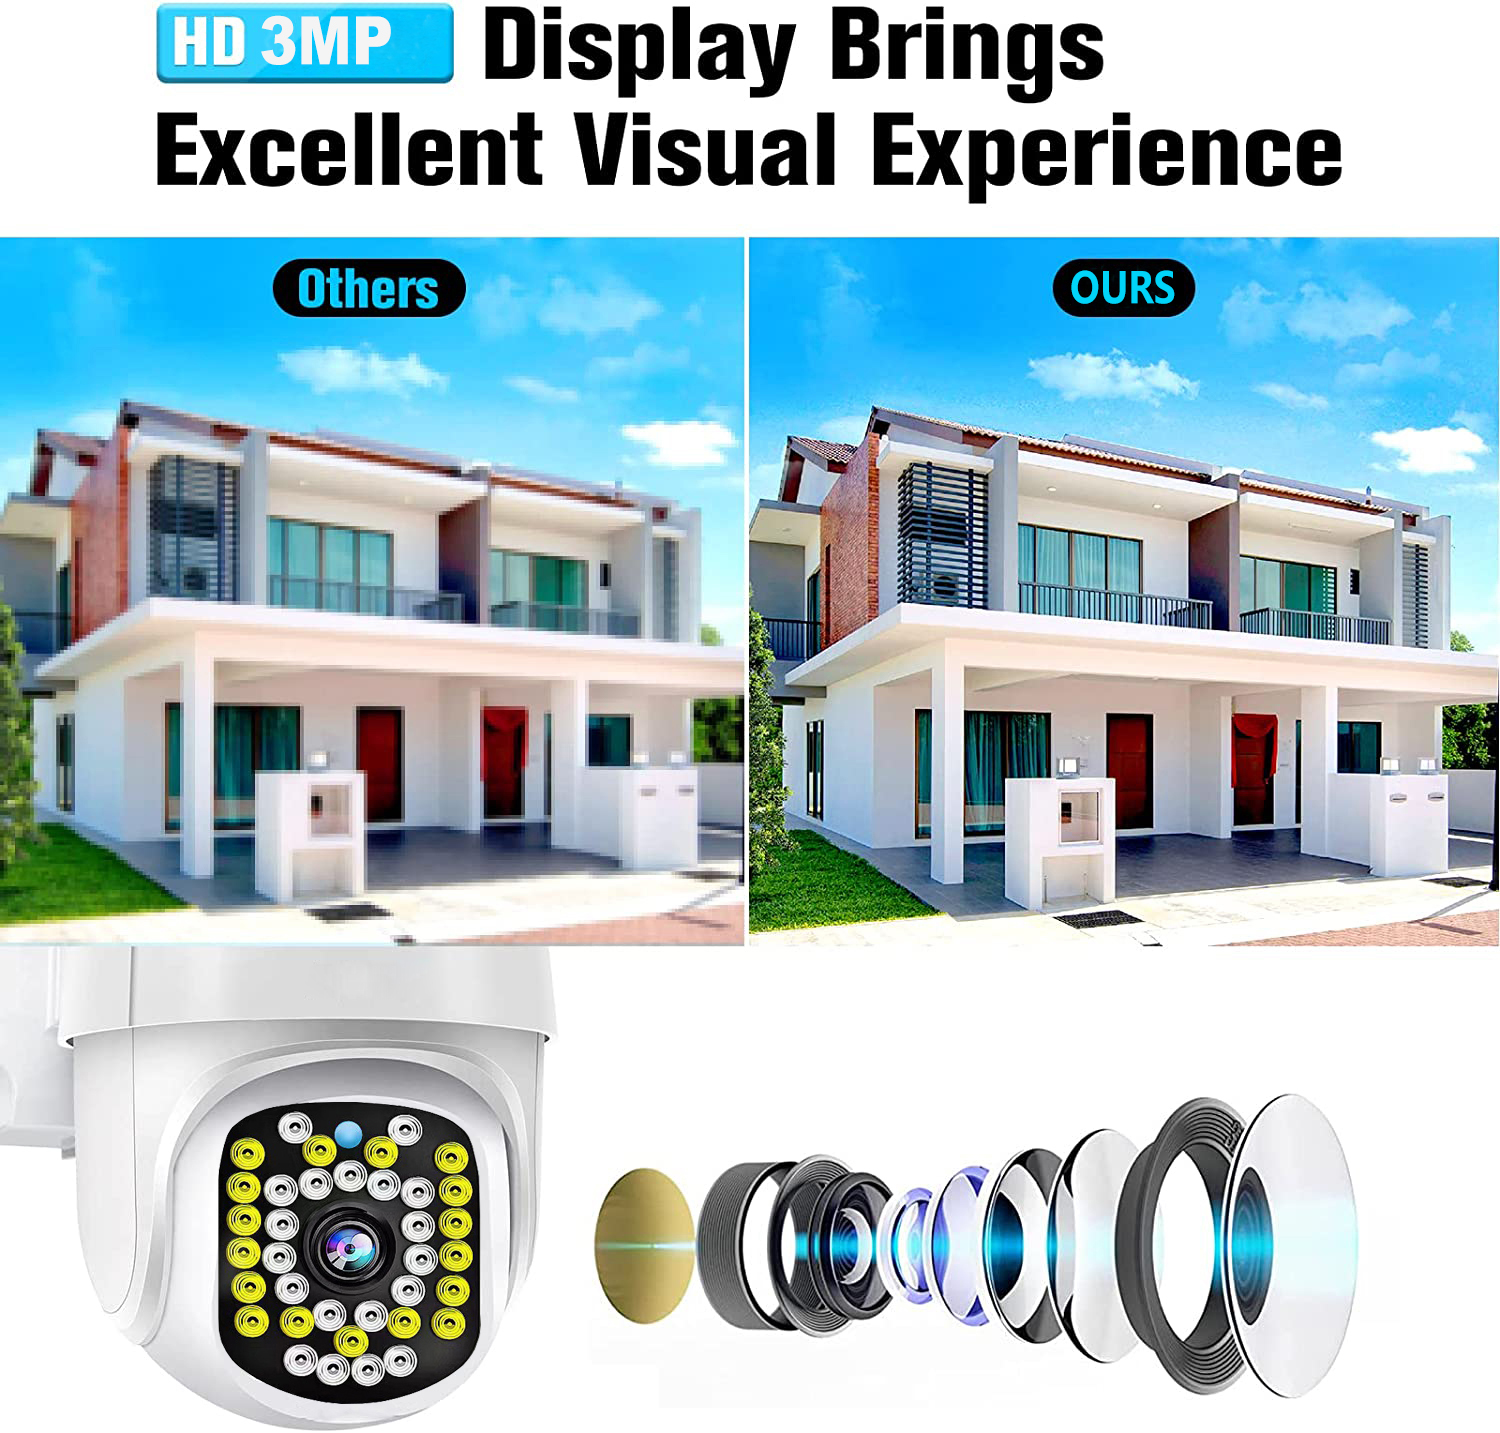 Security-Cameras-3MP-Security-Camera-WiFi-Camera-Outdoor-Home-Security-Camera-with-Spotlight-Night-Vision-Alarm-Remote-Access-Motion-Detection-Waterproof-2-Way-Audio-12